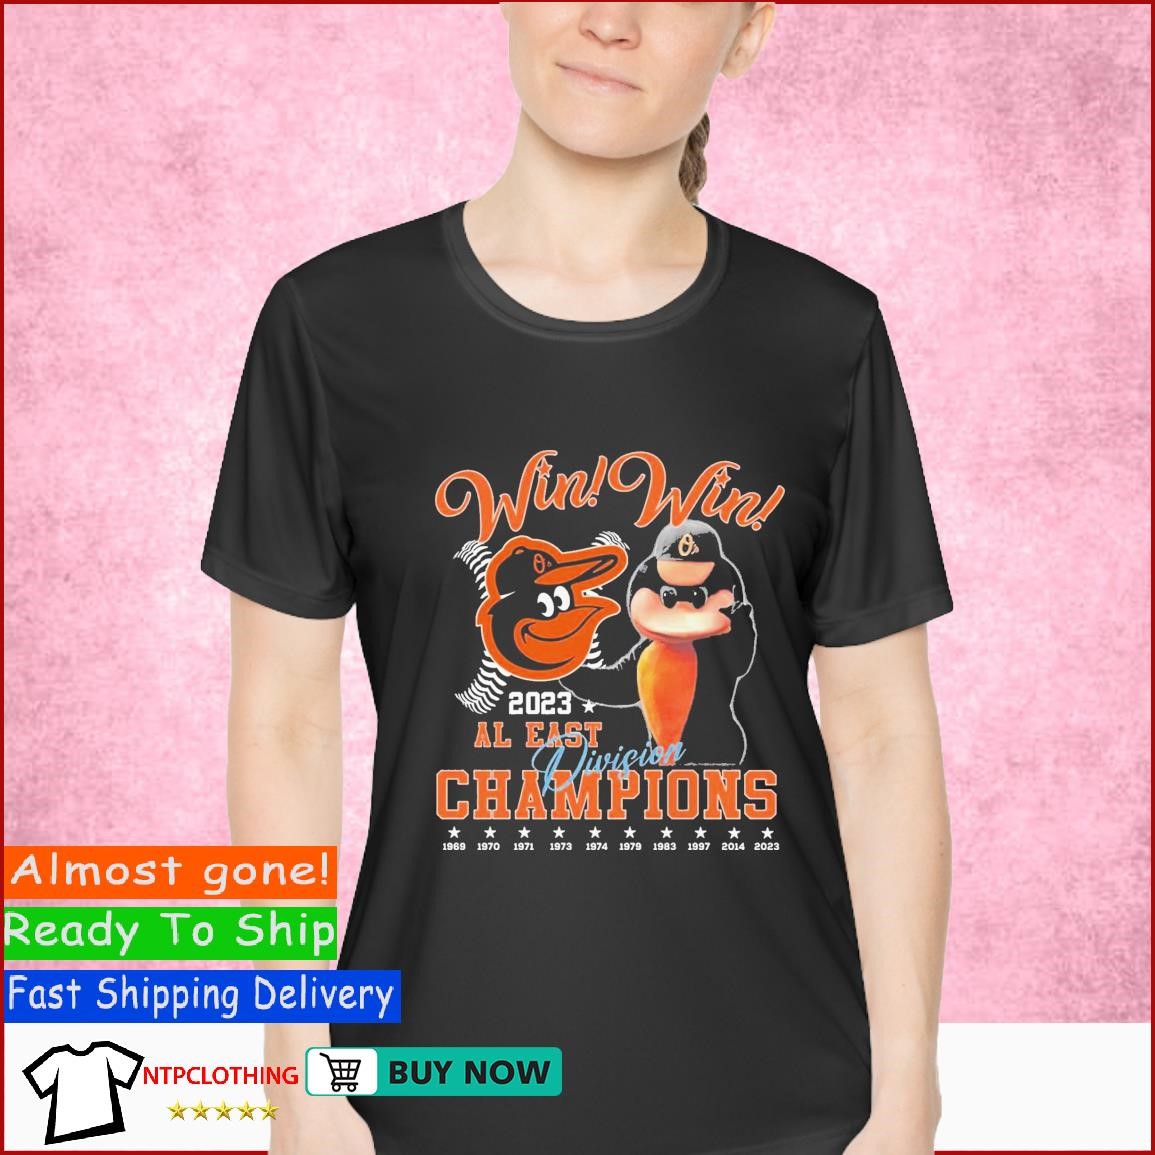 Orioles Al East Champions Shirt Hoodie Sweatshirt Mens Womens Kids Inspired  By Orioles Hoodie Giveaway 2023 Orioles Playoff Tickets Orioles Postseason  Shirts - Laughinks